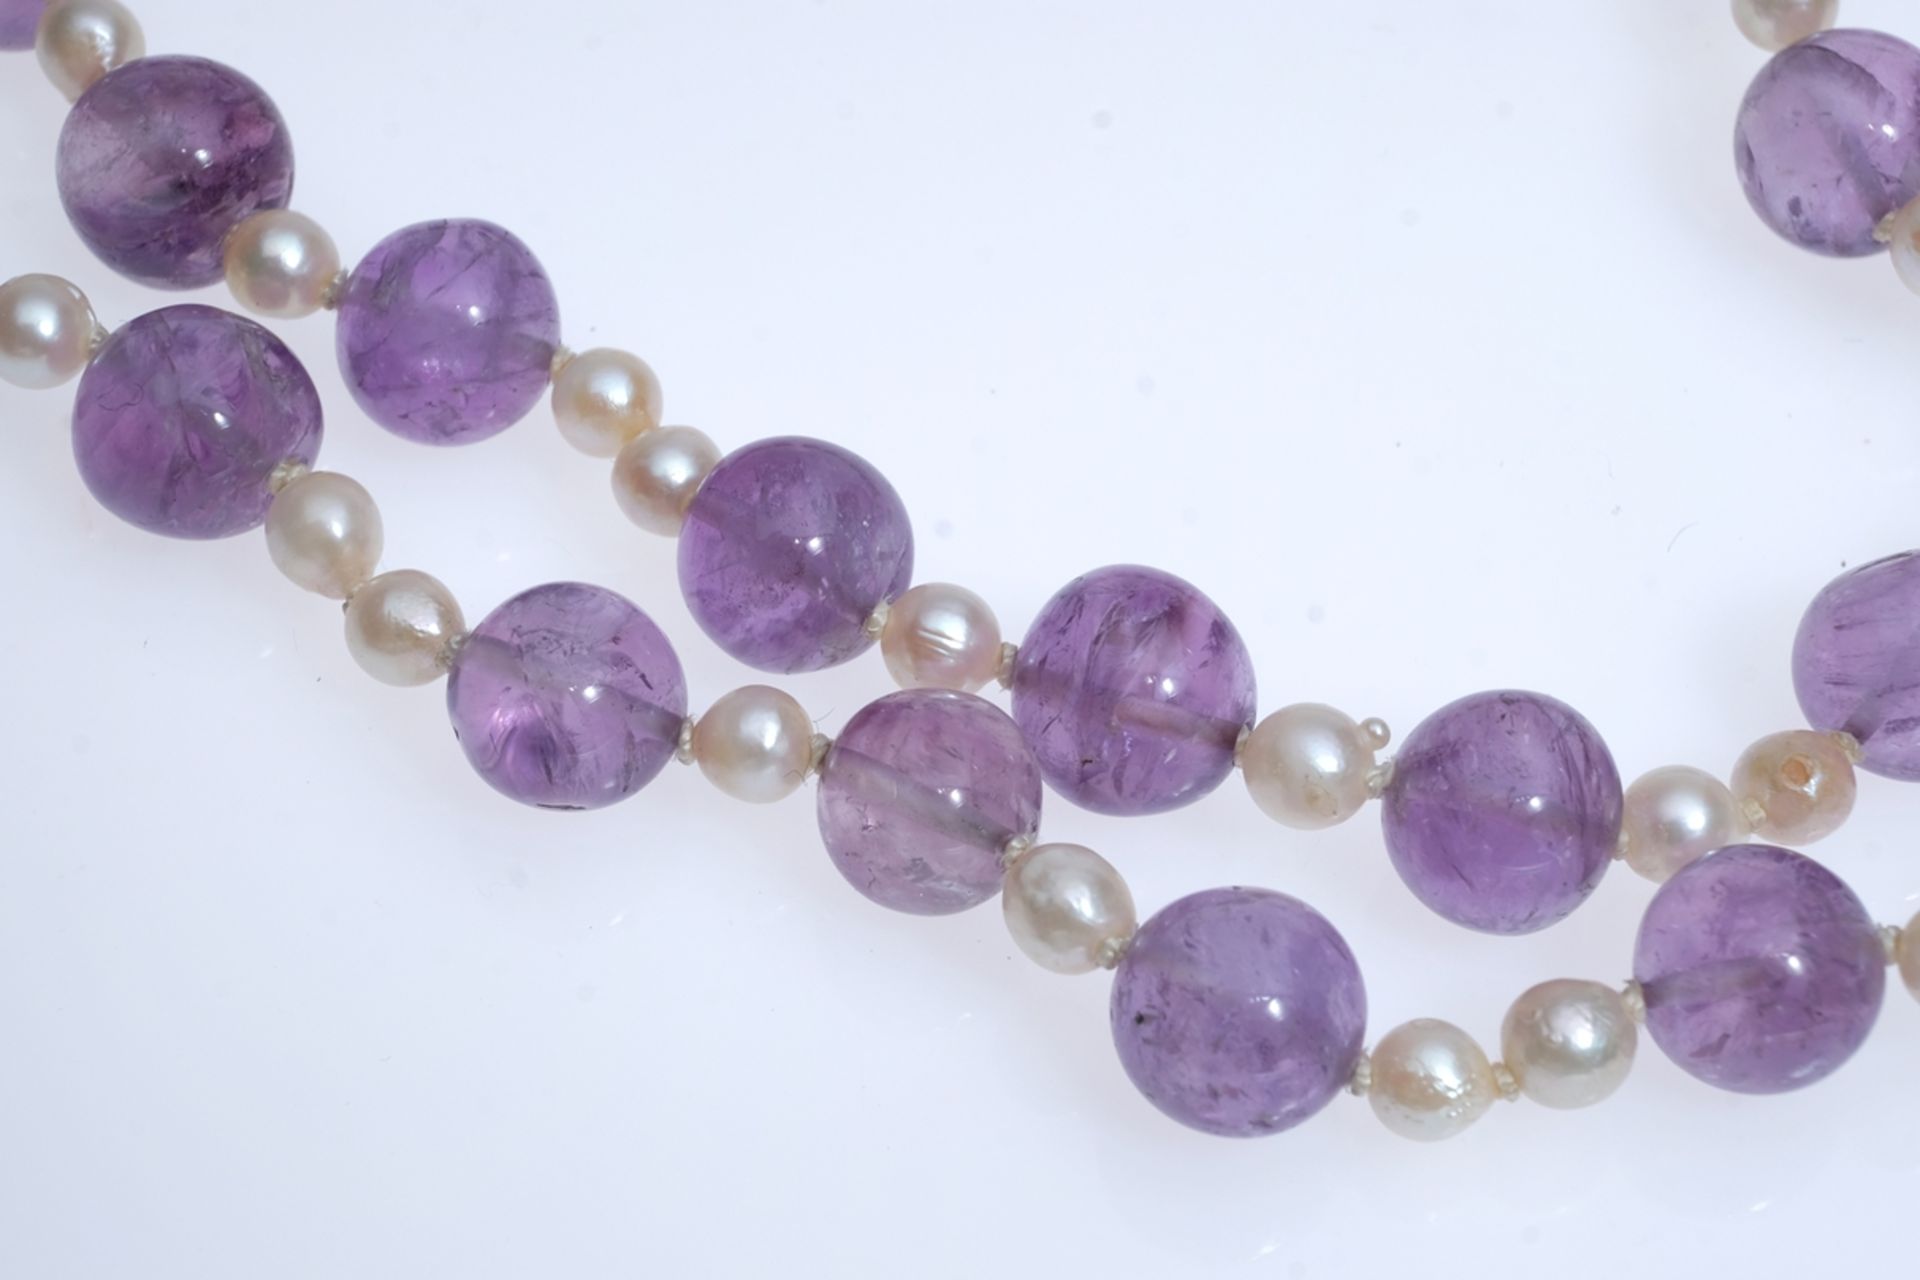 Long amethyst necklace, alternating stones and pearls, 333 white gold clasp, length 106cm - Image 2 of 2